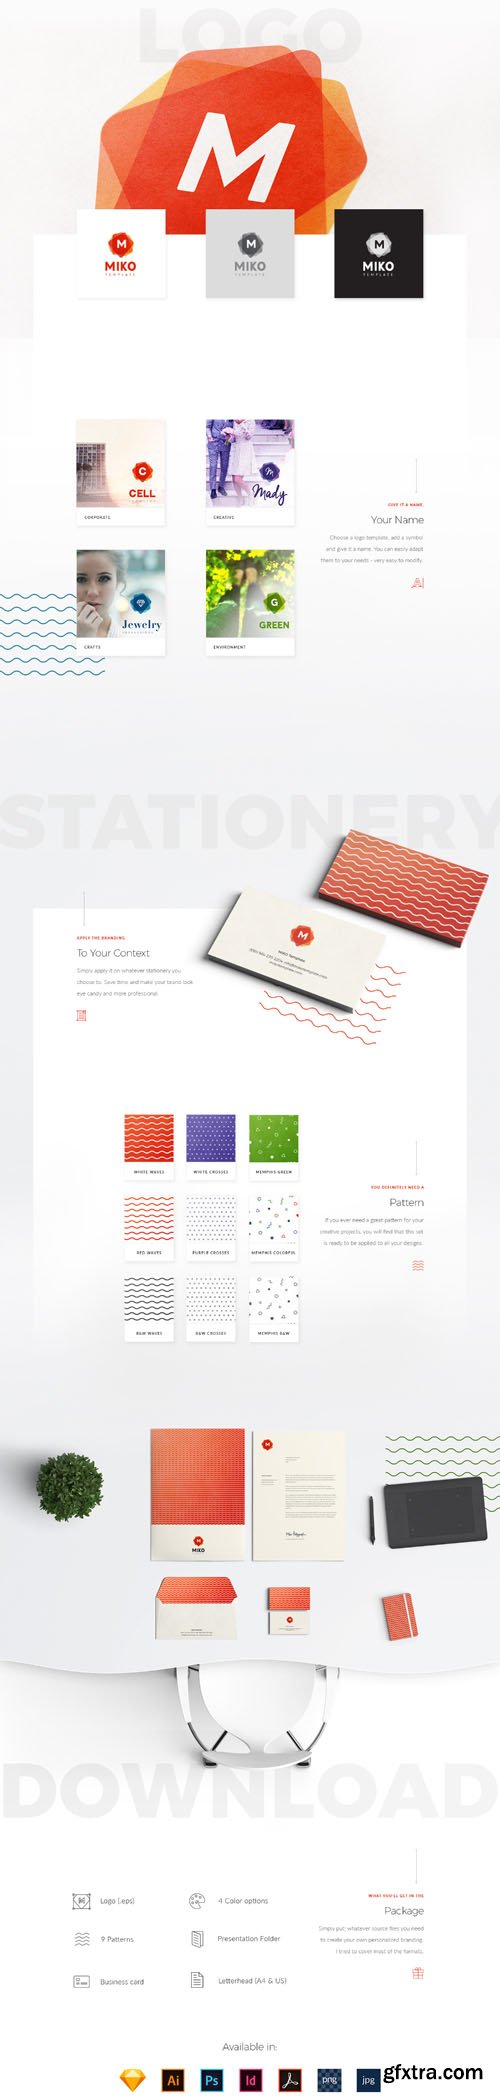 MIKO Logo Pattern Stationery Templates [AI/EPS/PSD/INDD/Sketch]